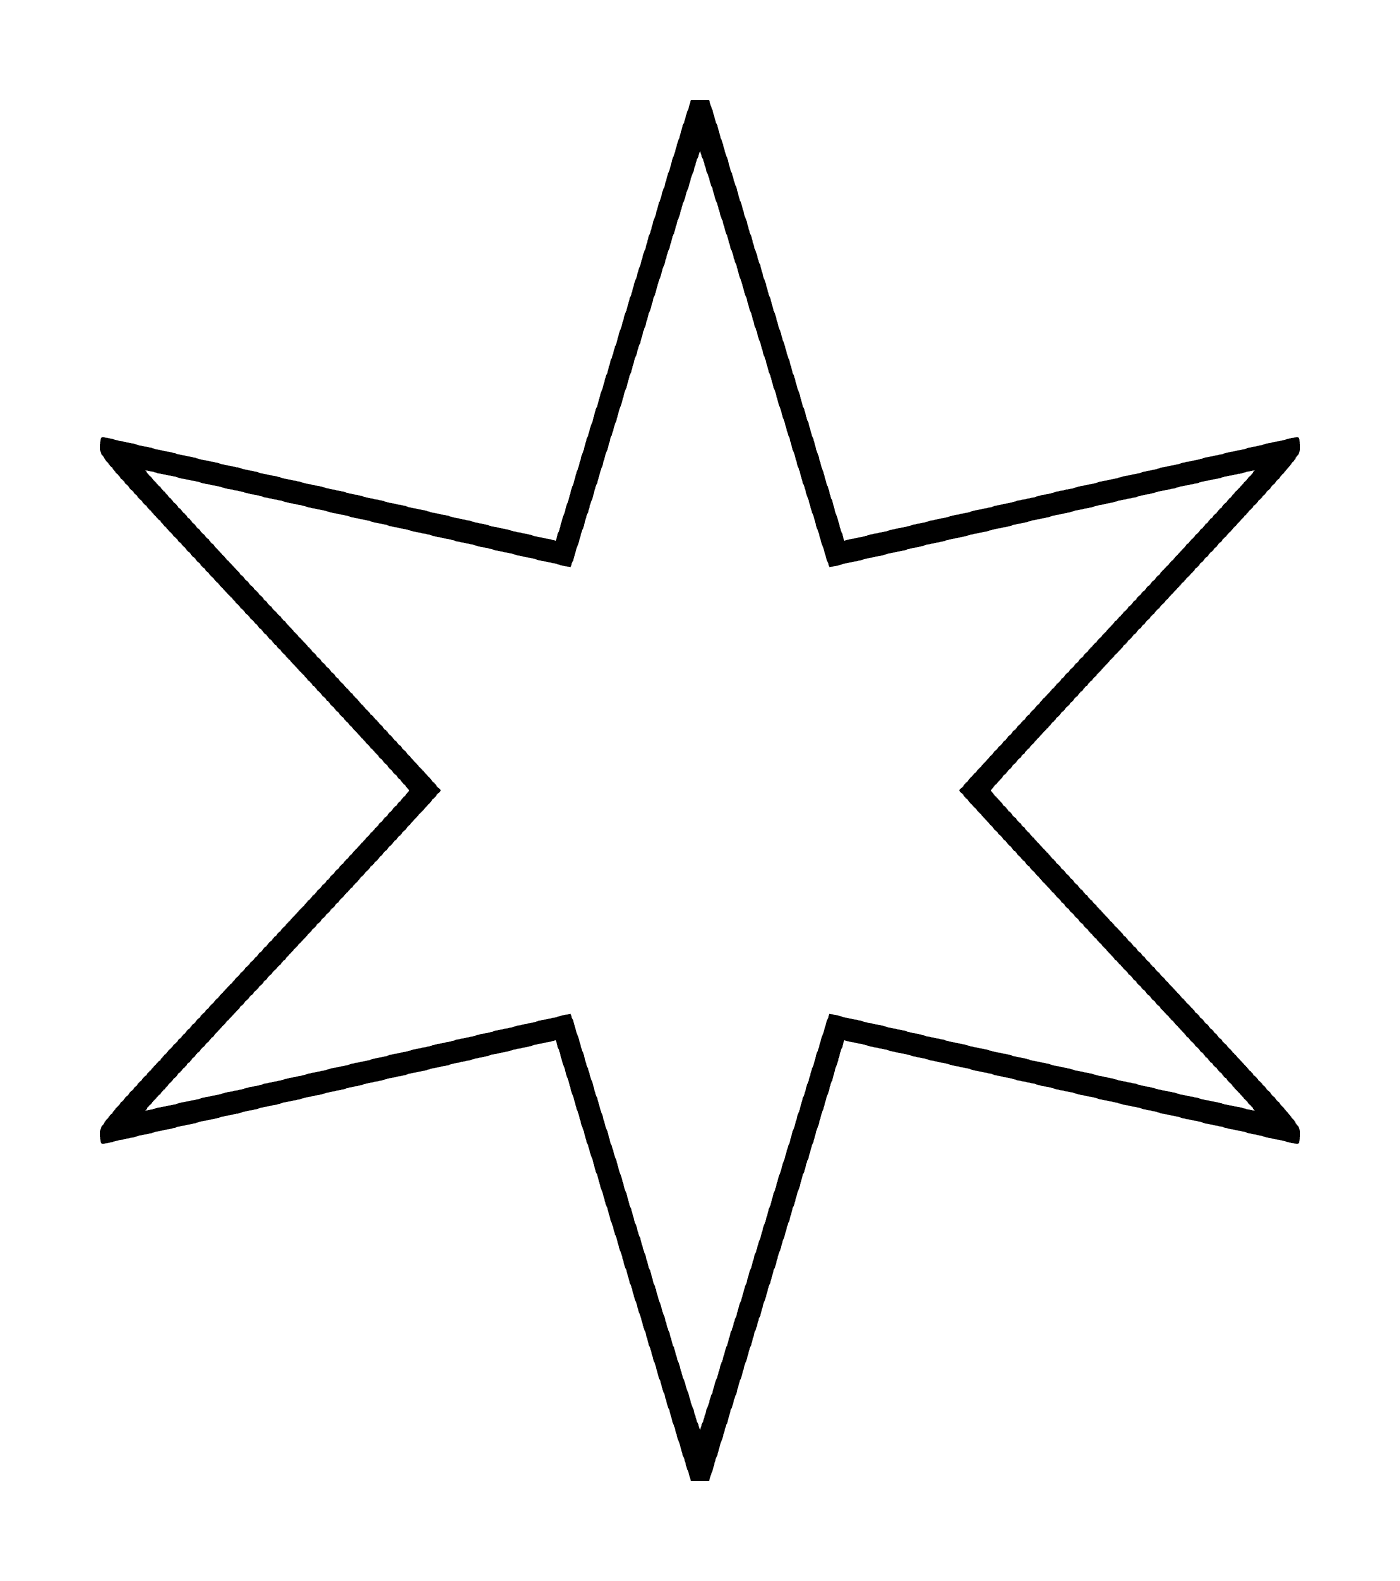  A six-pointed star resembling a flower 